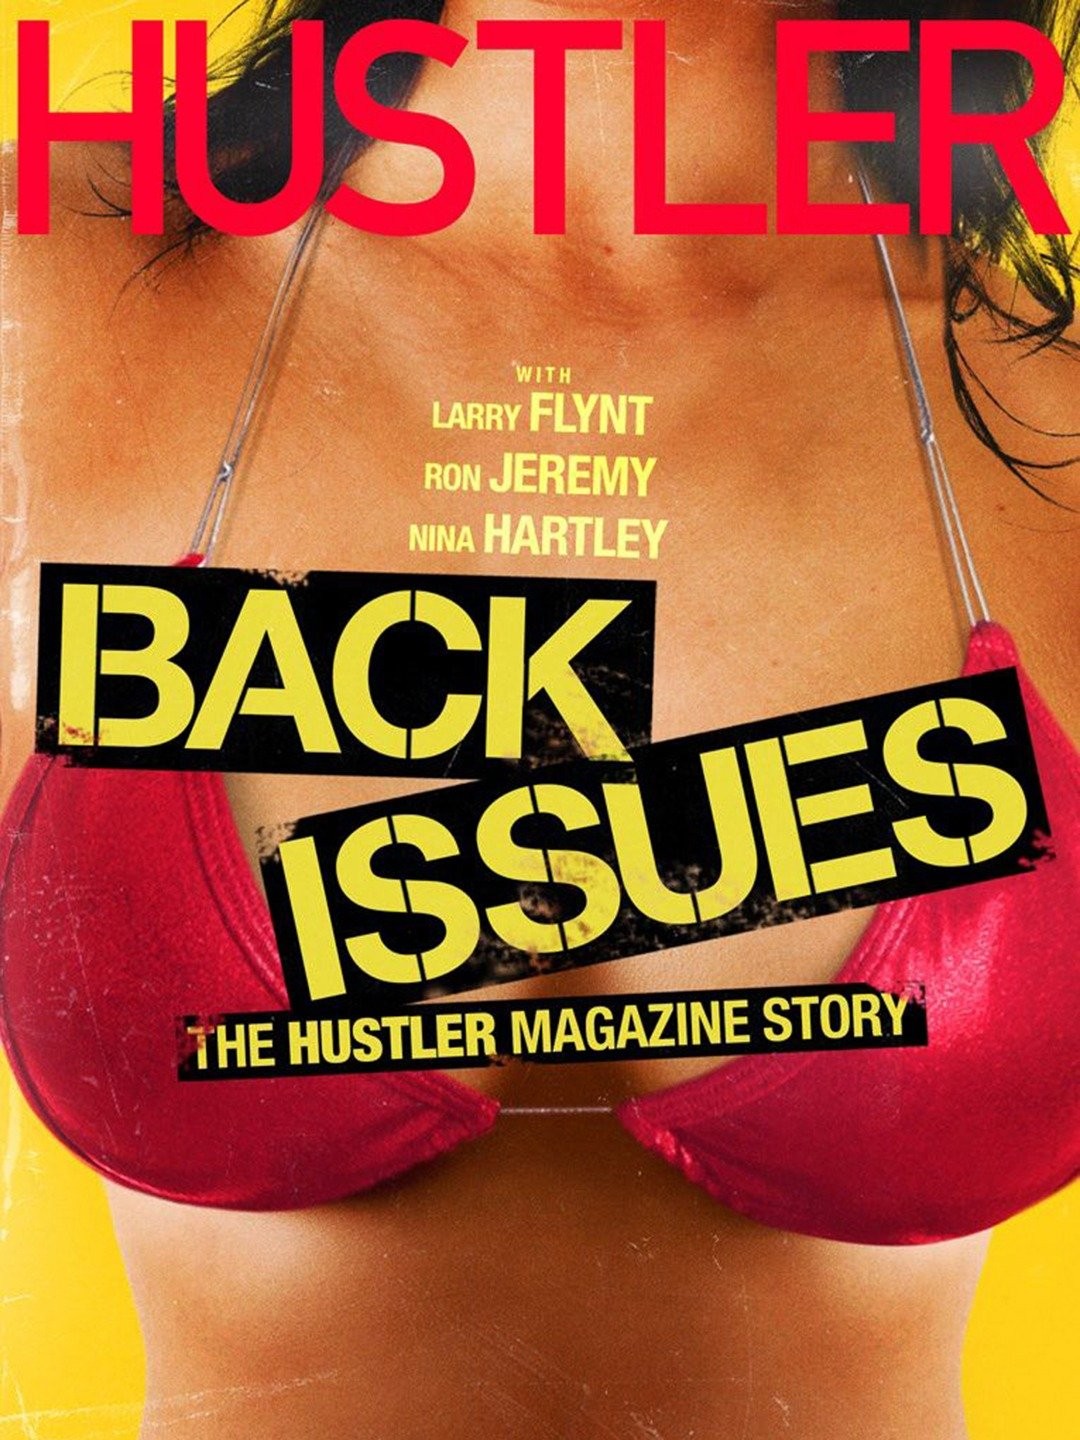 Back Issues: The Hustler Magazine Story | Rotten Tomatoes